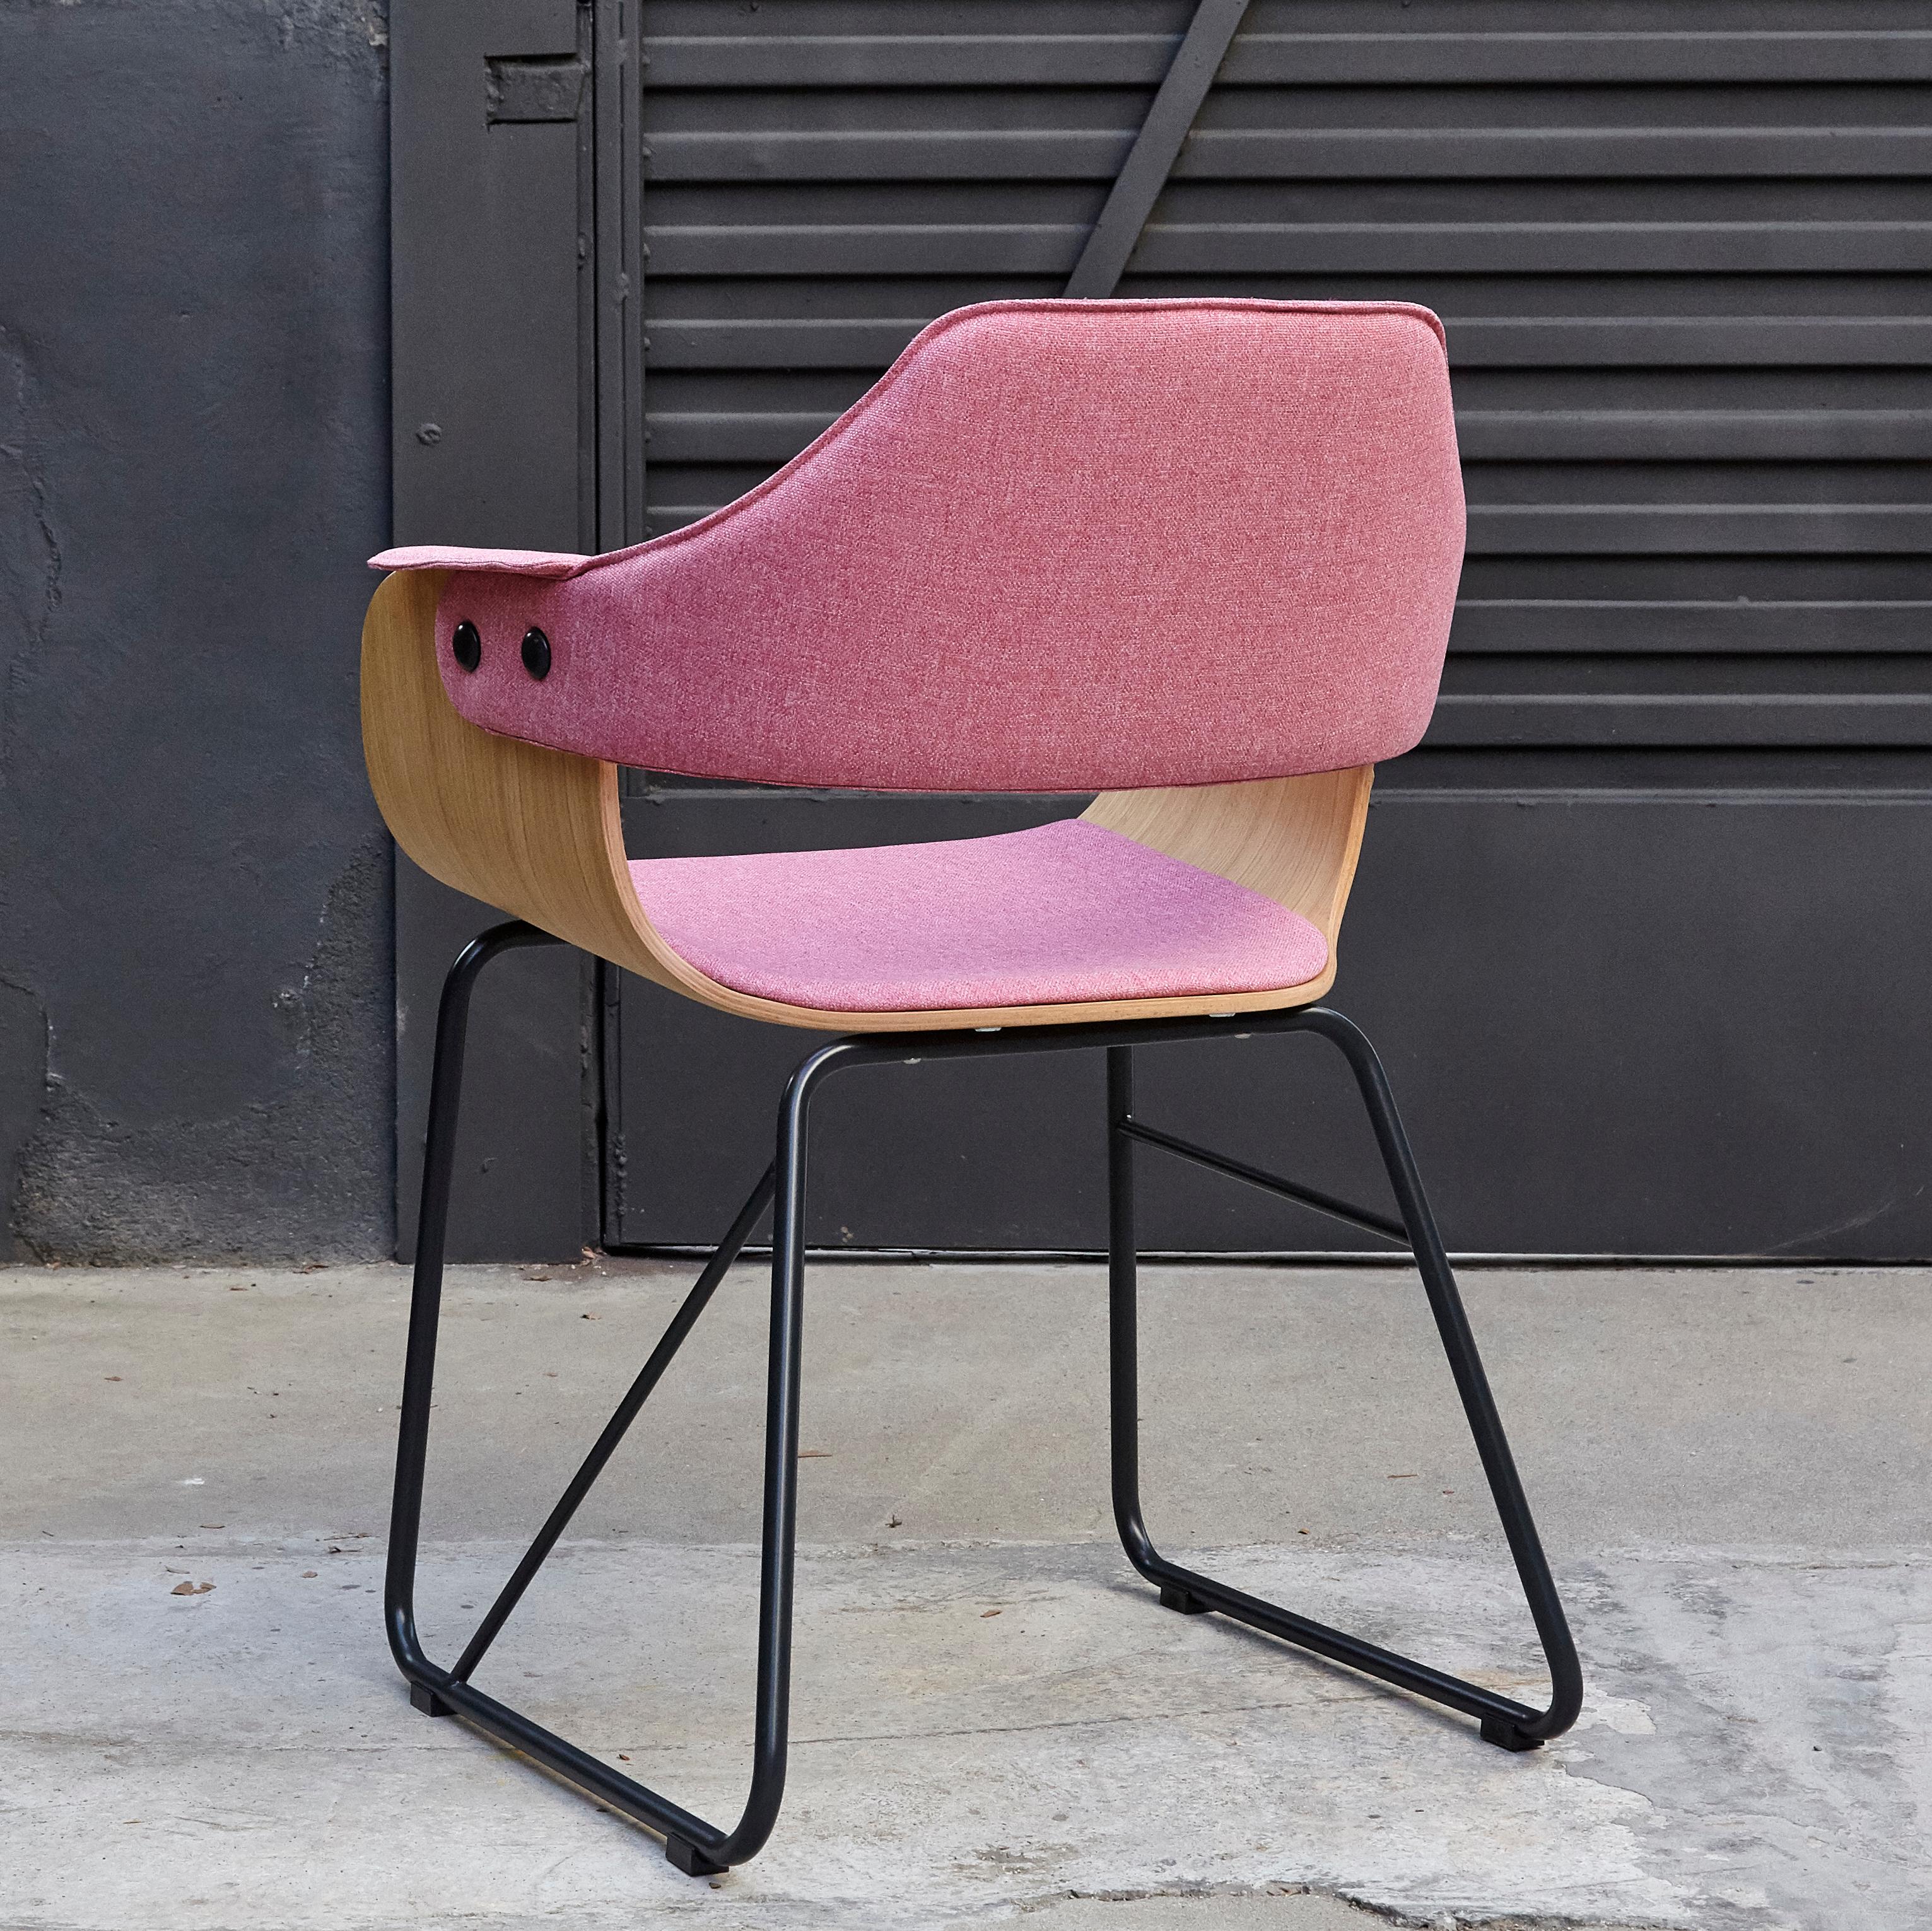 Steel Jaime Hayon Contemporary Pink Upholstered Wood Chair Showtime by BD Barcelona